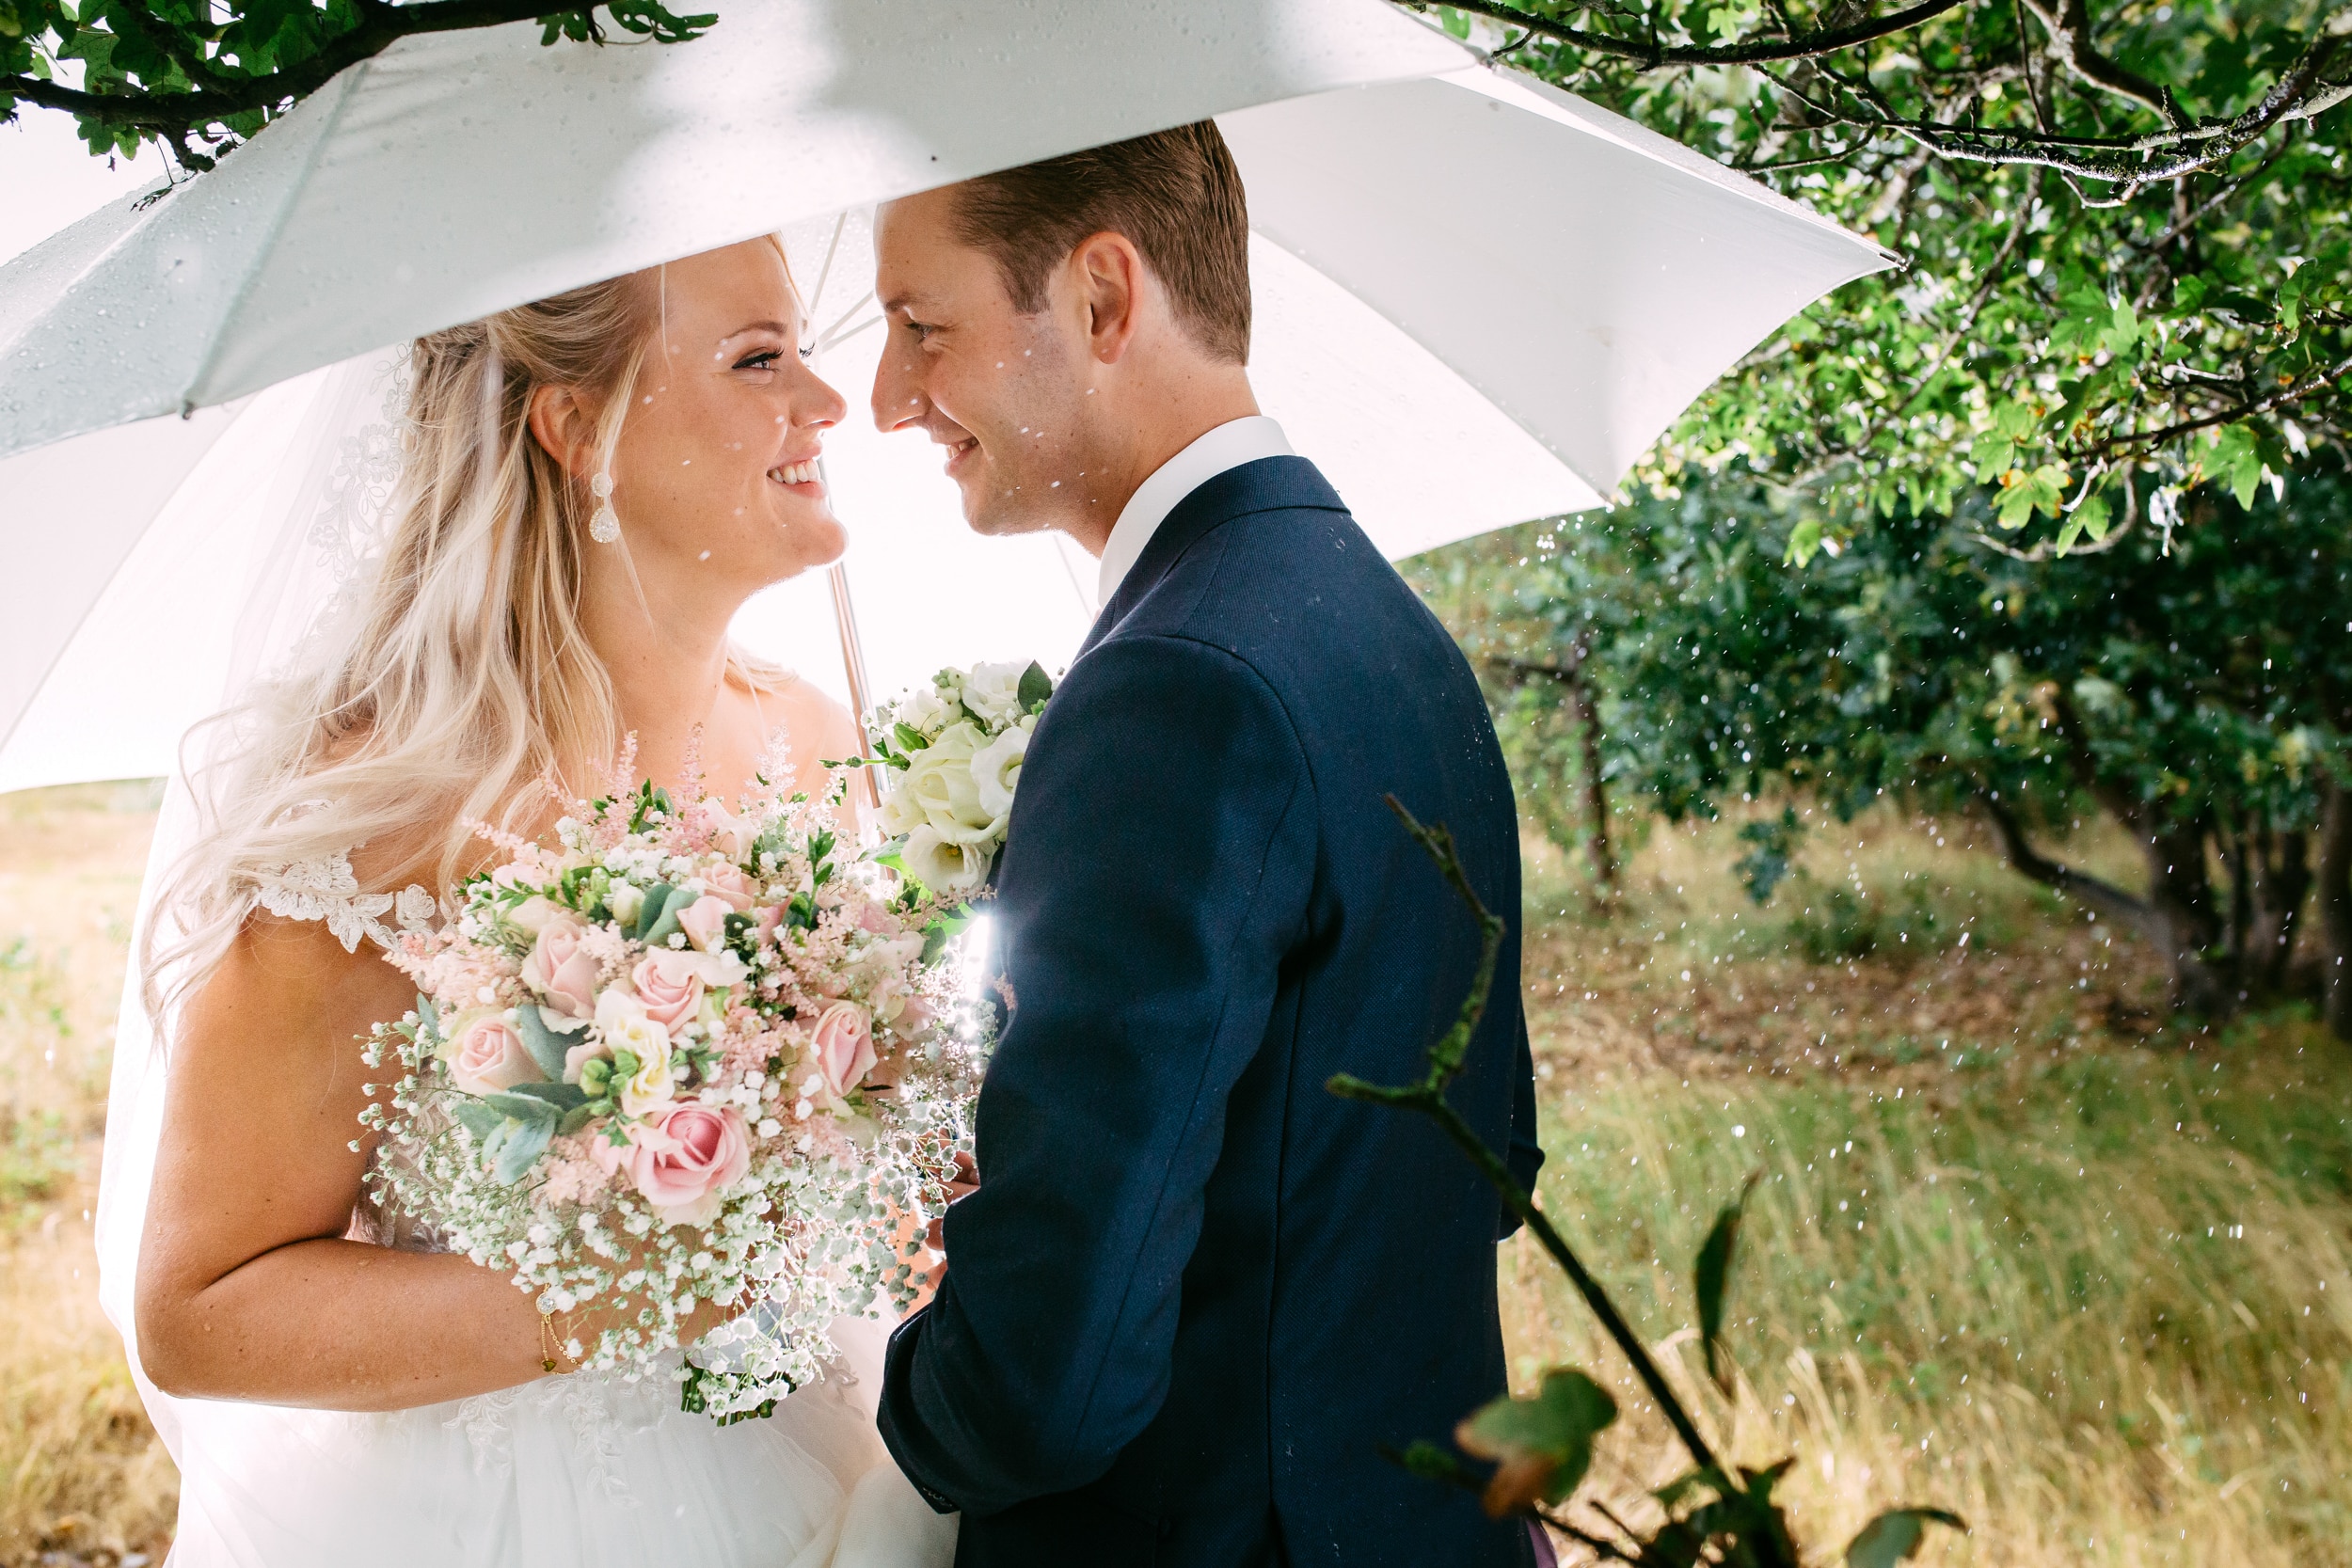 A bride and groom from The Hague stand under an umbrella.